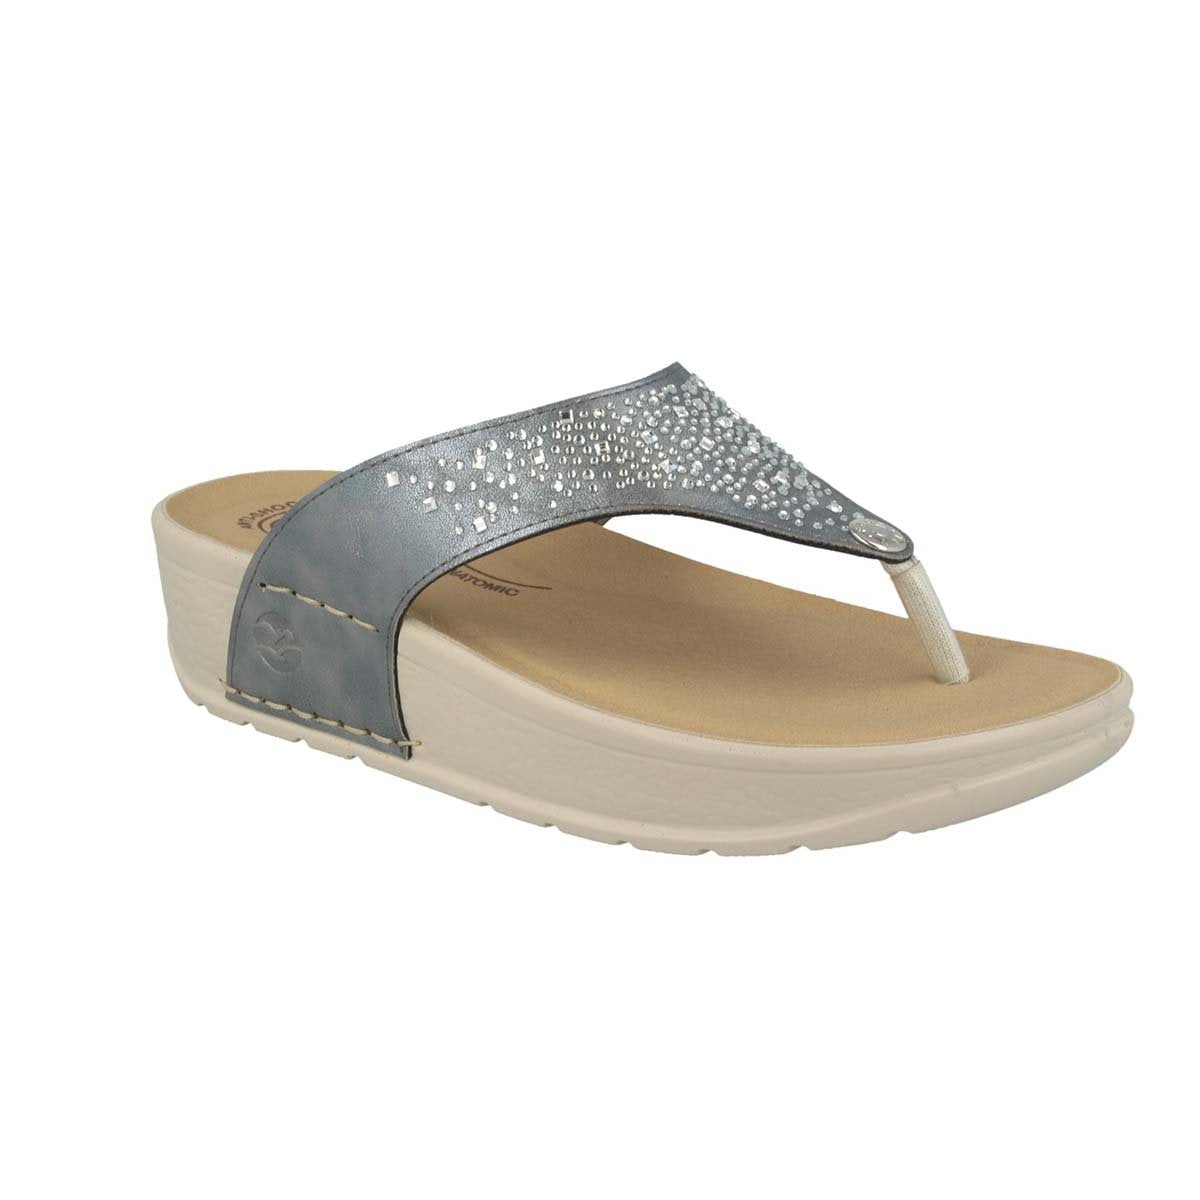 Photo of the Synthetic Woman Slipper Grey (38e60a2)